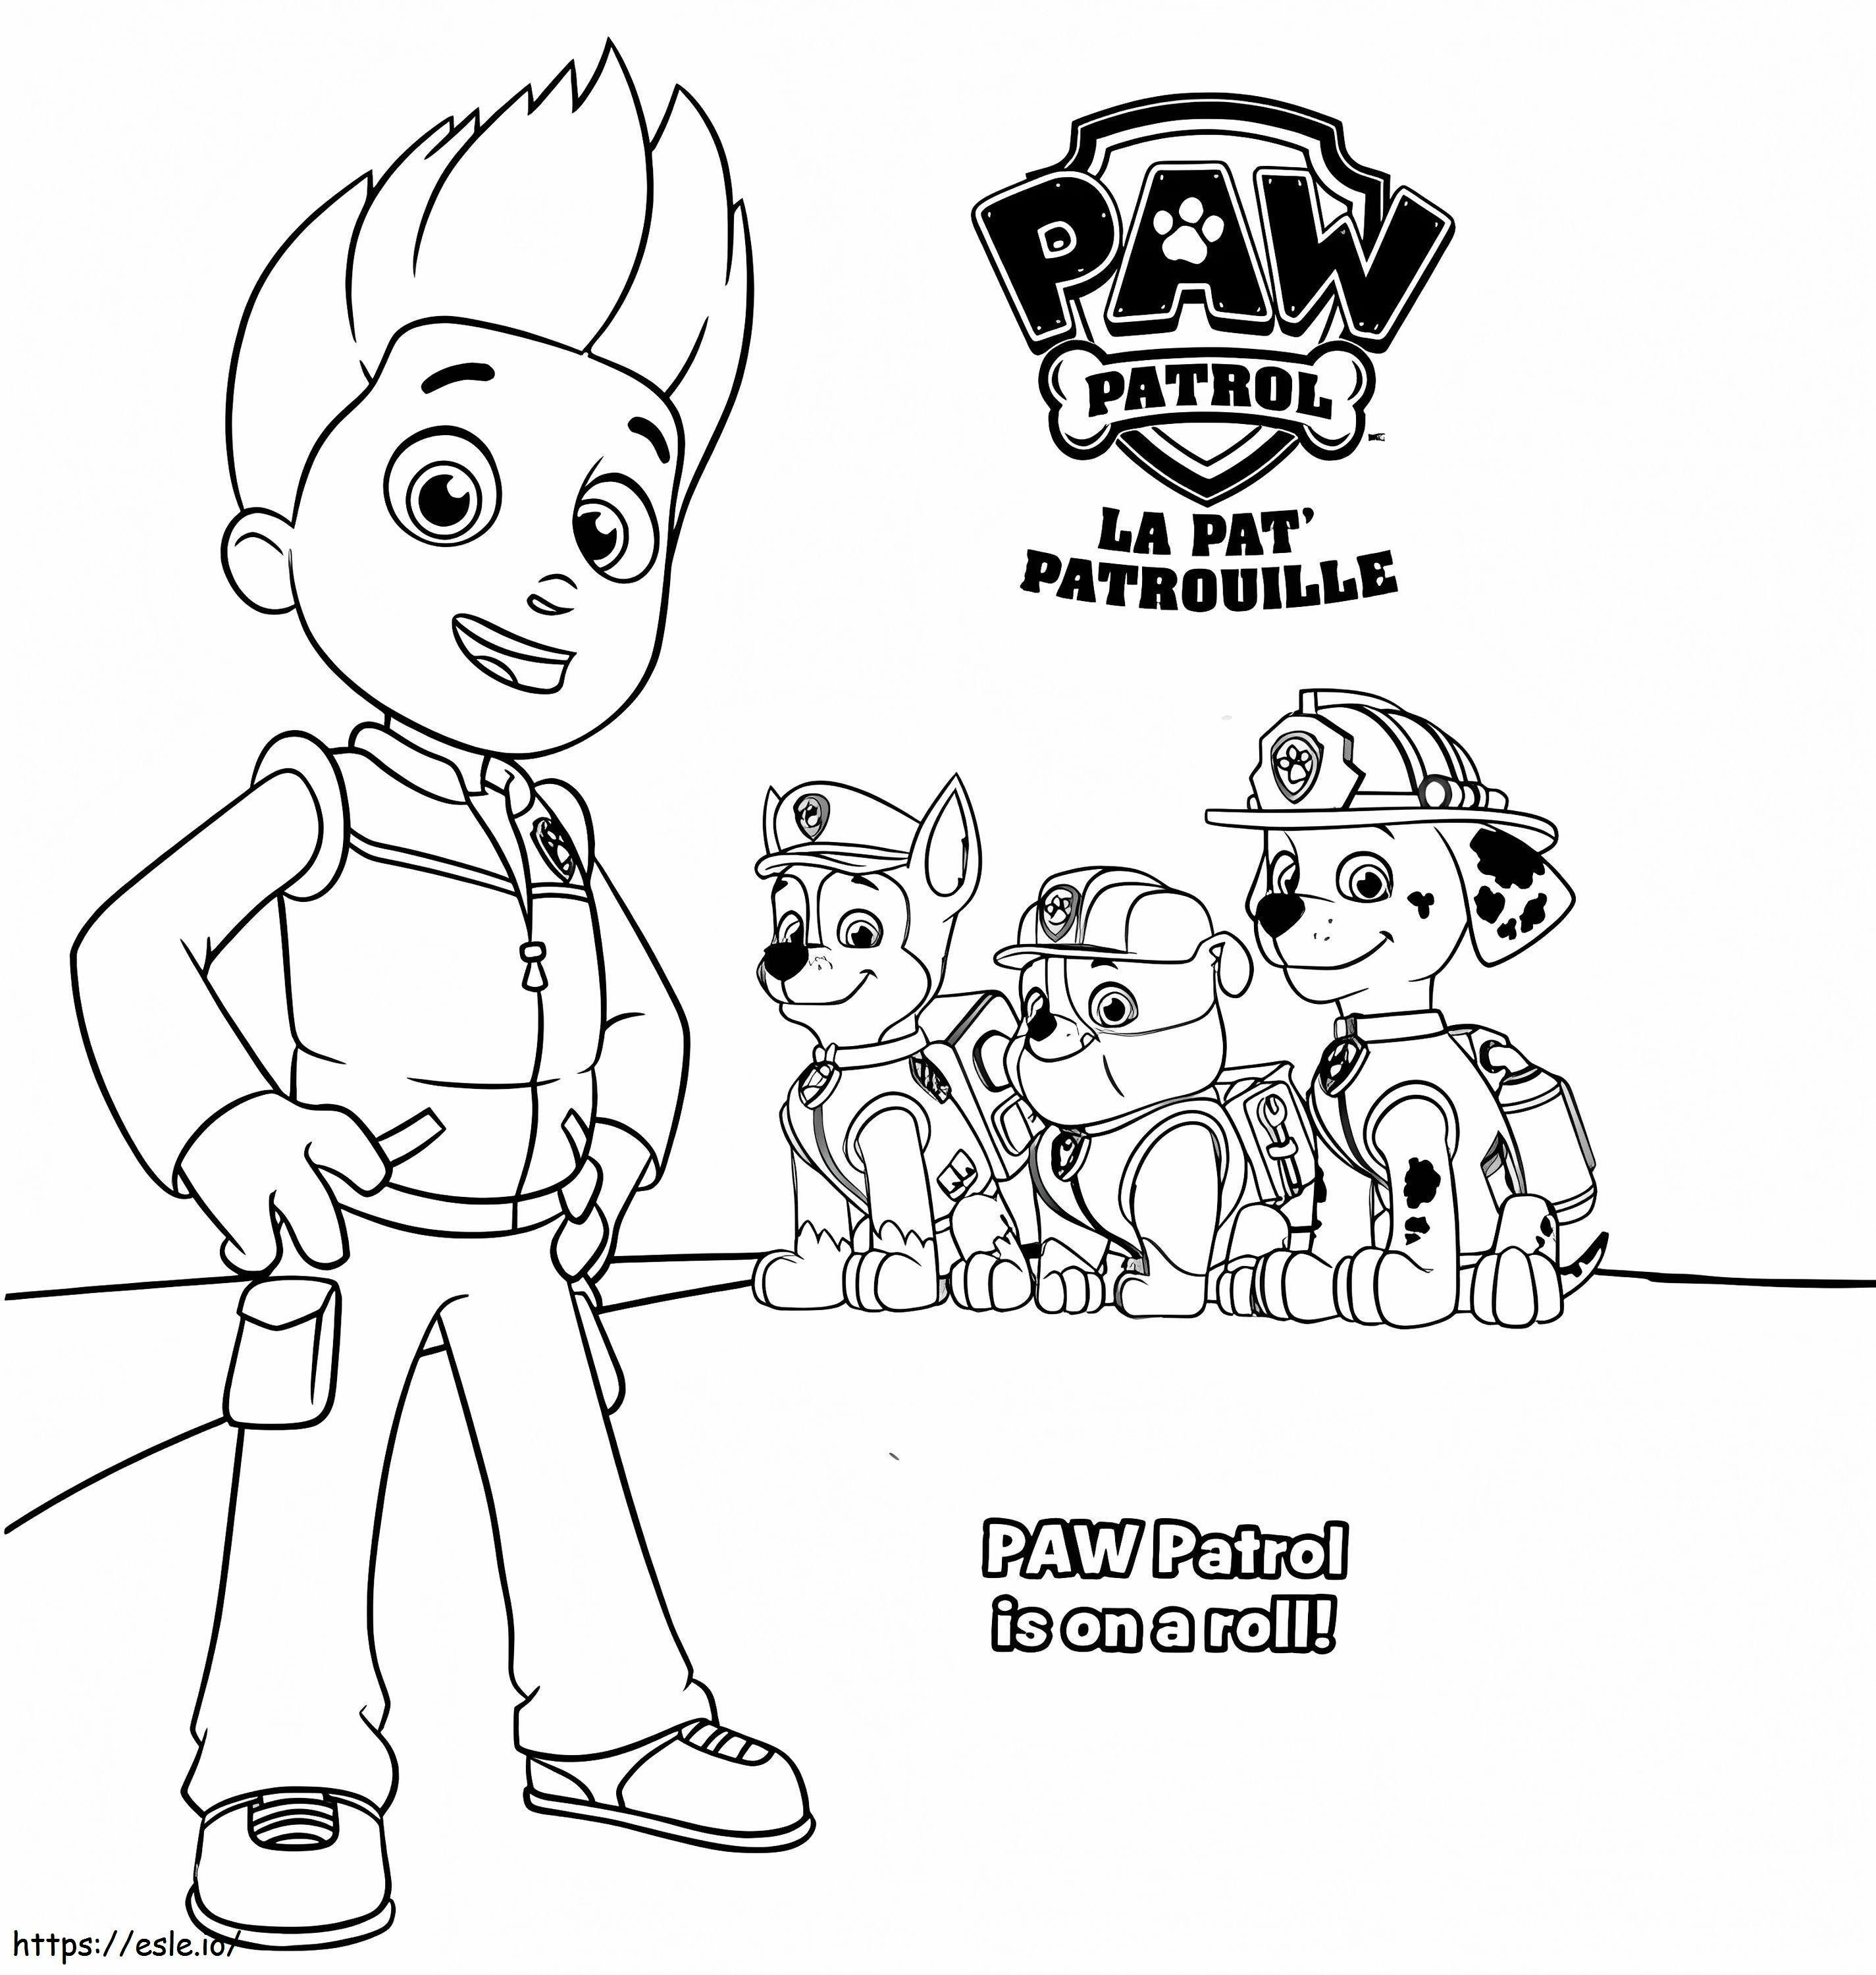 Chase Paw Patrol 13 coloring page